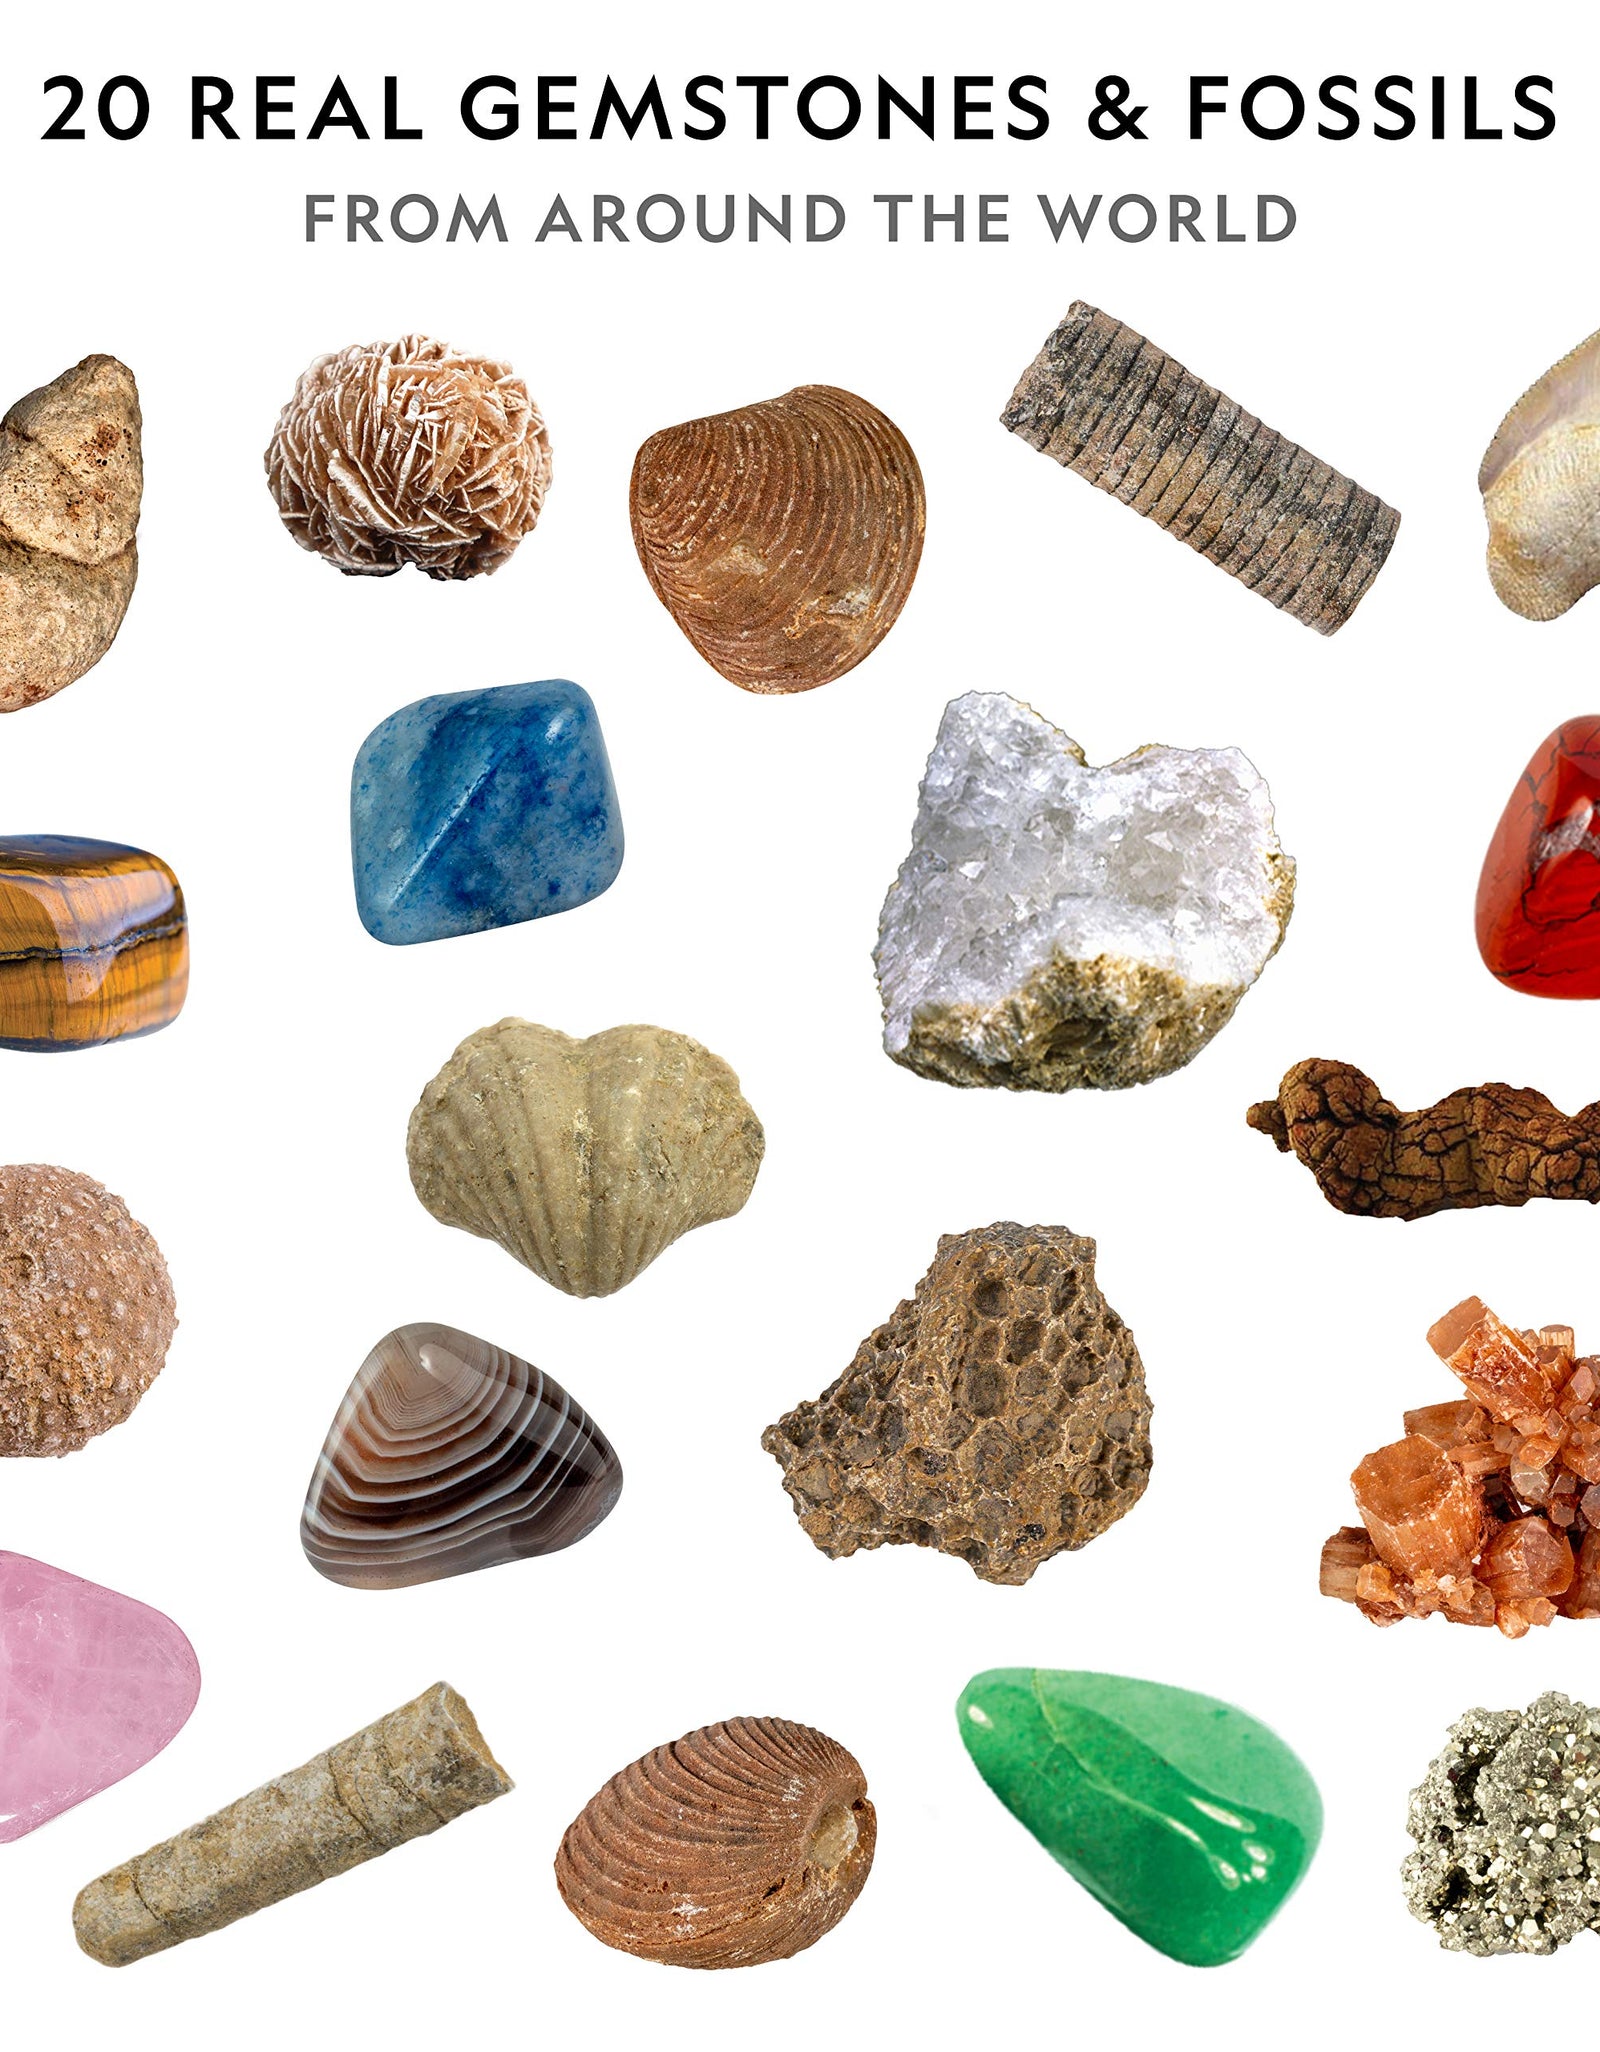 NATIONAL GEOGRAPHIC Mega Fossil and Gemstone Dig Kits - Excavate 20 Real Fossils and Gems, Great STEM Science Gift for Mineralogy and Geology Enthusiasts of Any Age